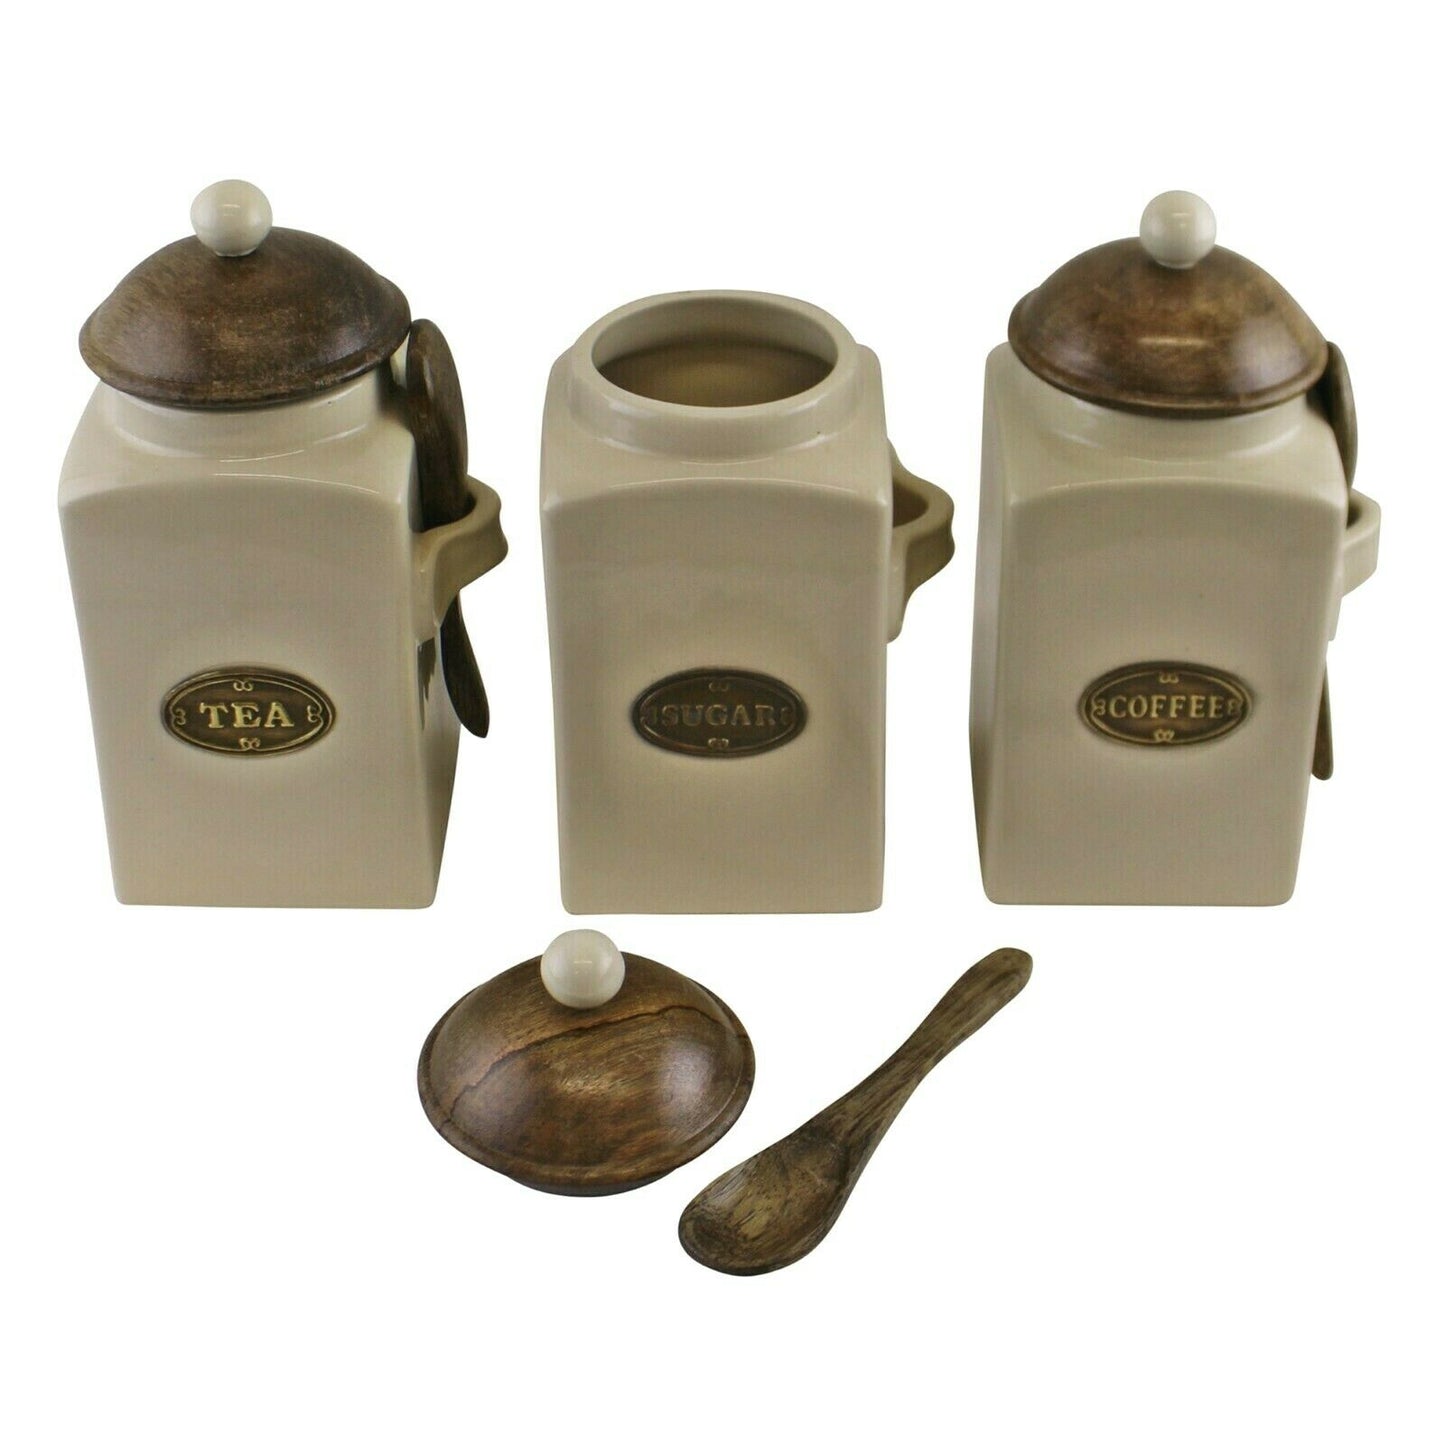 Large Tea, Coffee & Sugar Storage Canisters Set with Spoons Airtight Lids Open View